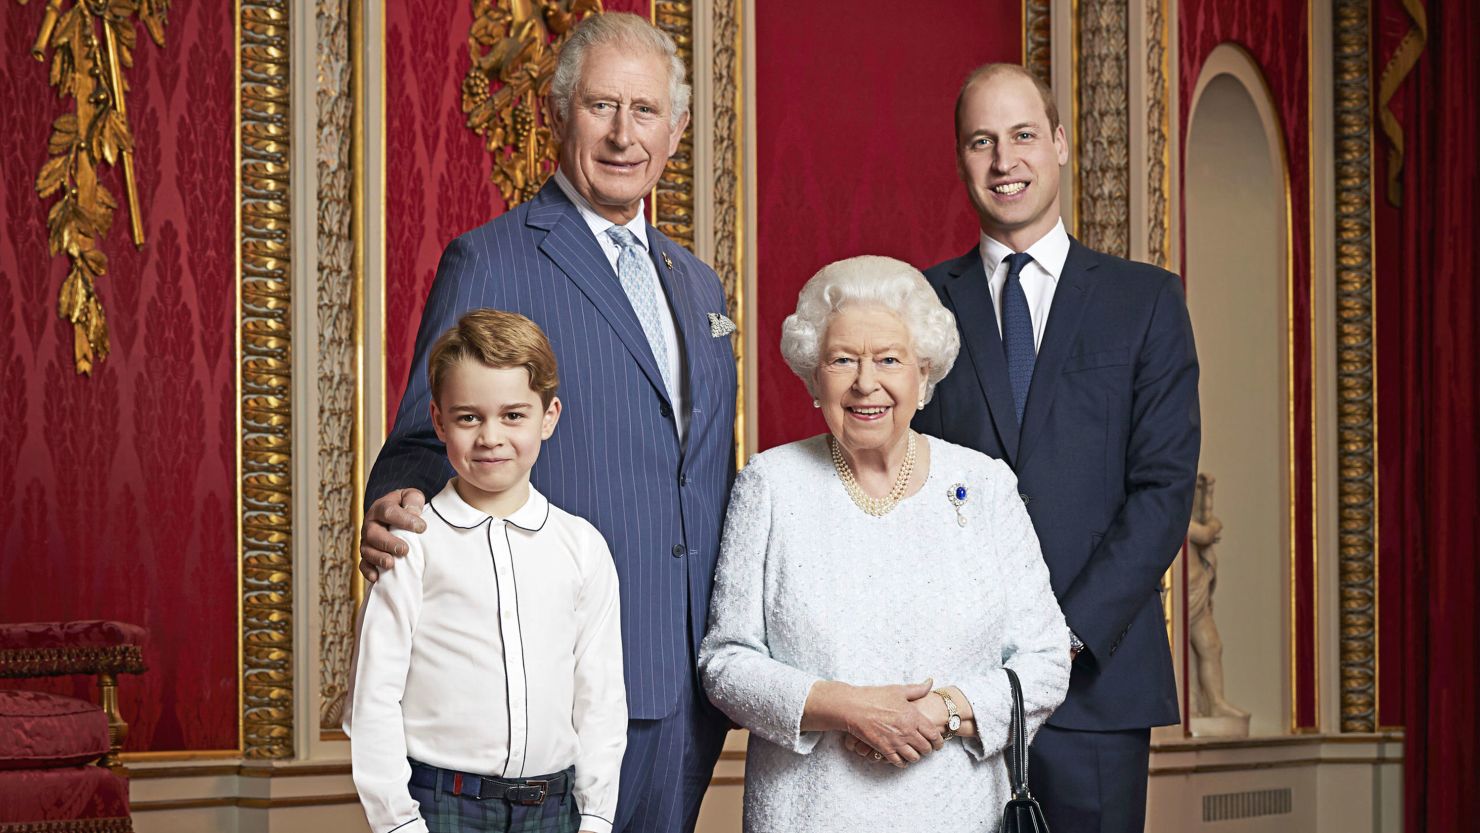 Britain's Queen Elizabeth, Prince Charles, Prince William and Prince George pose for a photo to mark the start of the new decade at Buckingham Palace in London. This is only the second time such a portrait of the monarch and the next three in line to the throne has been released.